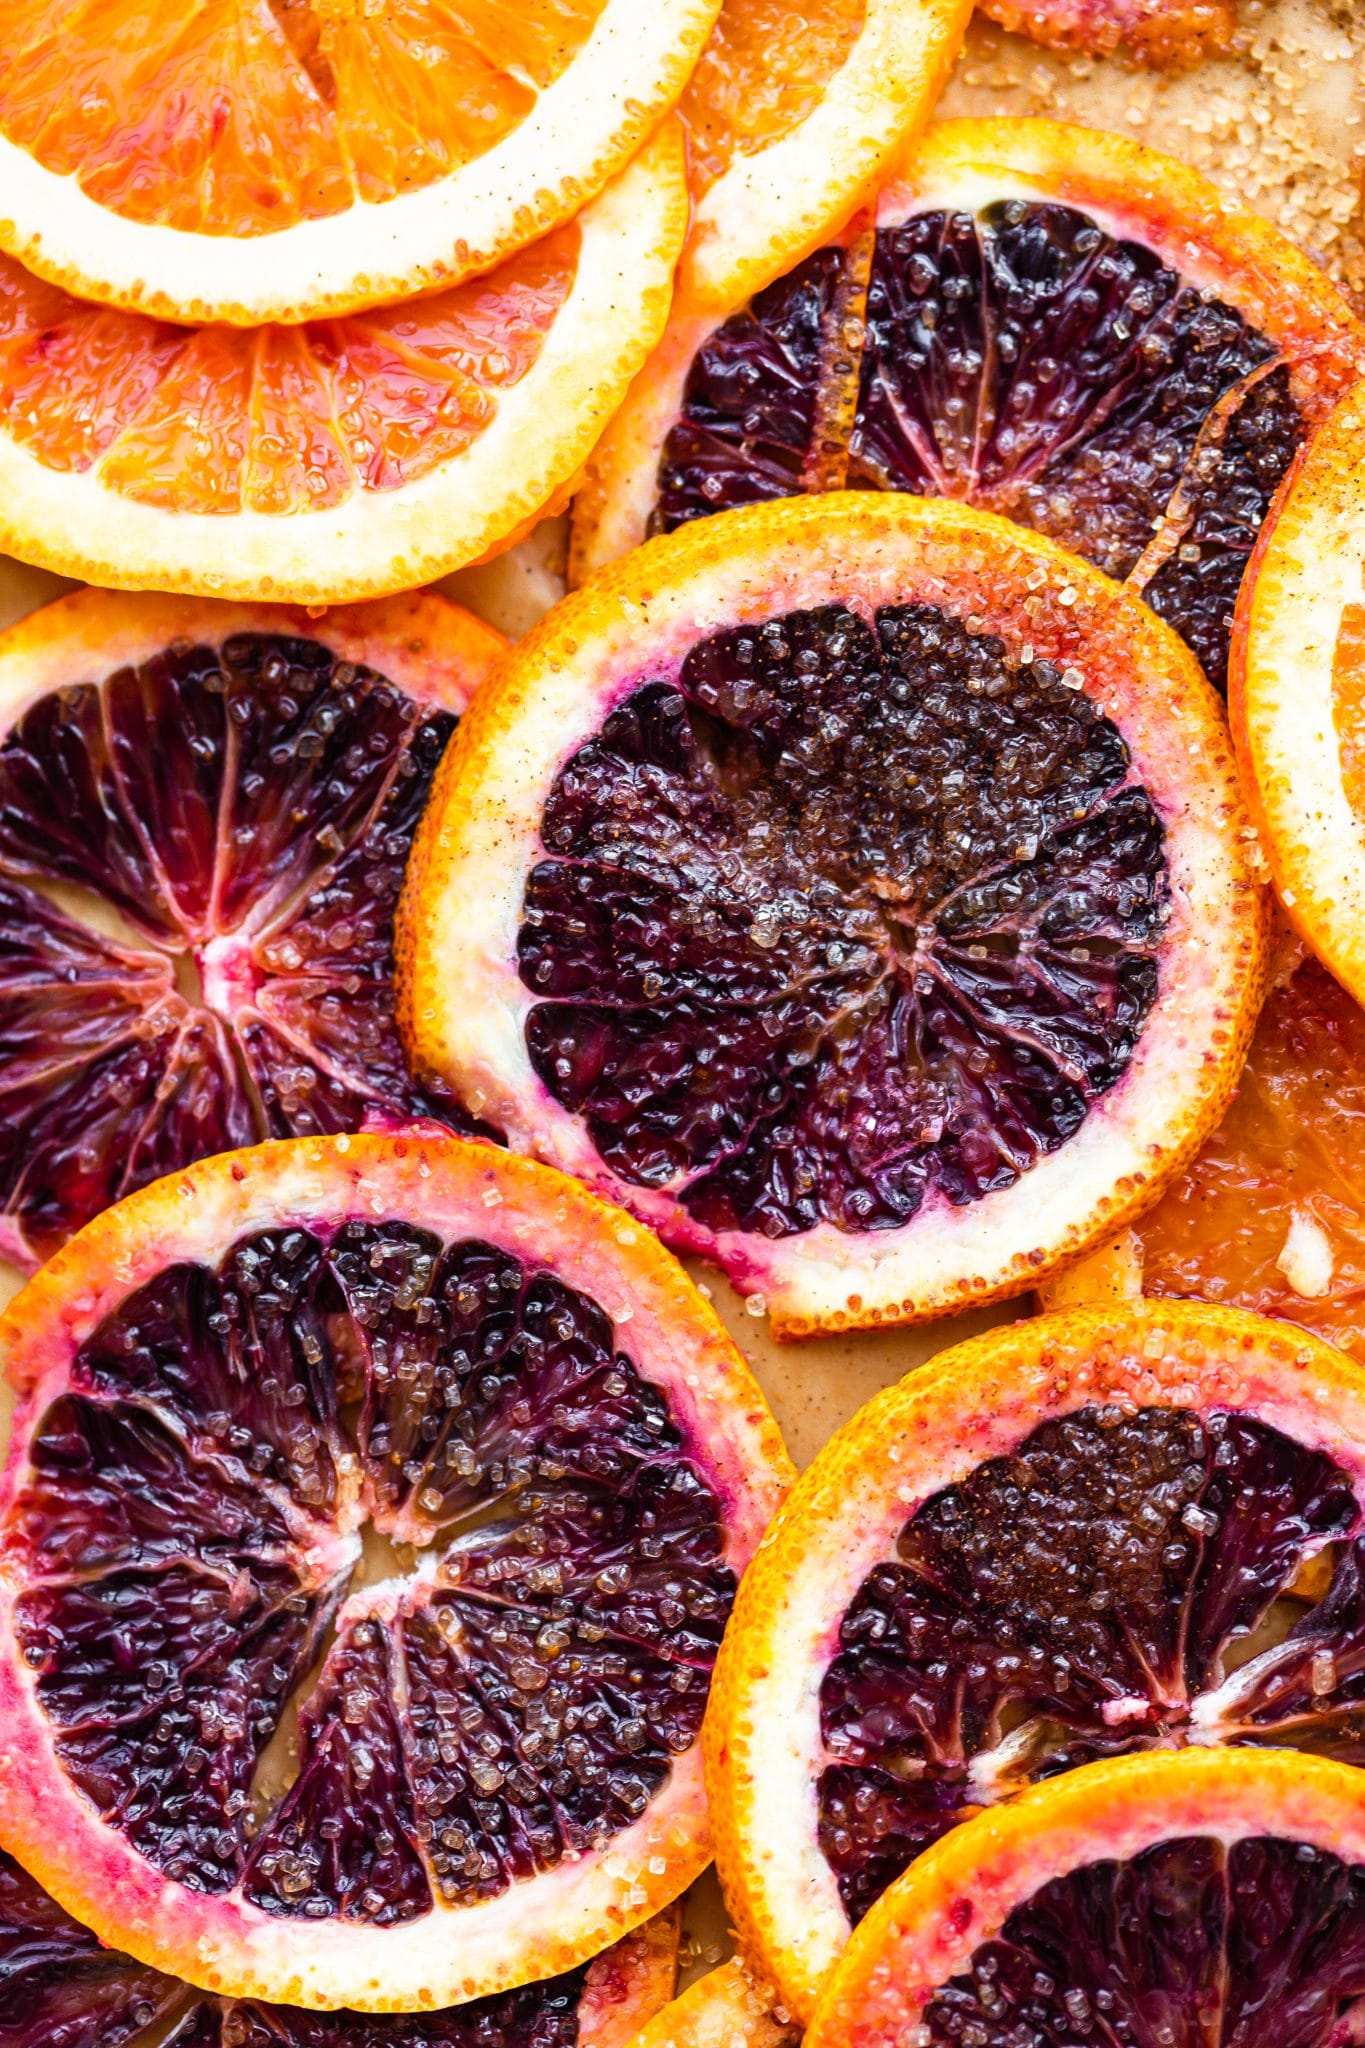 blood orange slices sprinkled with sugar and spices